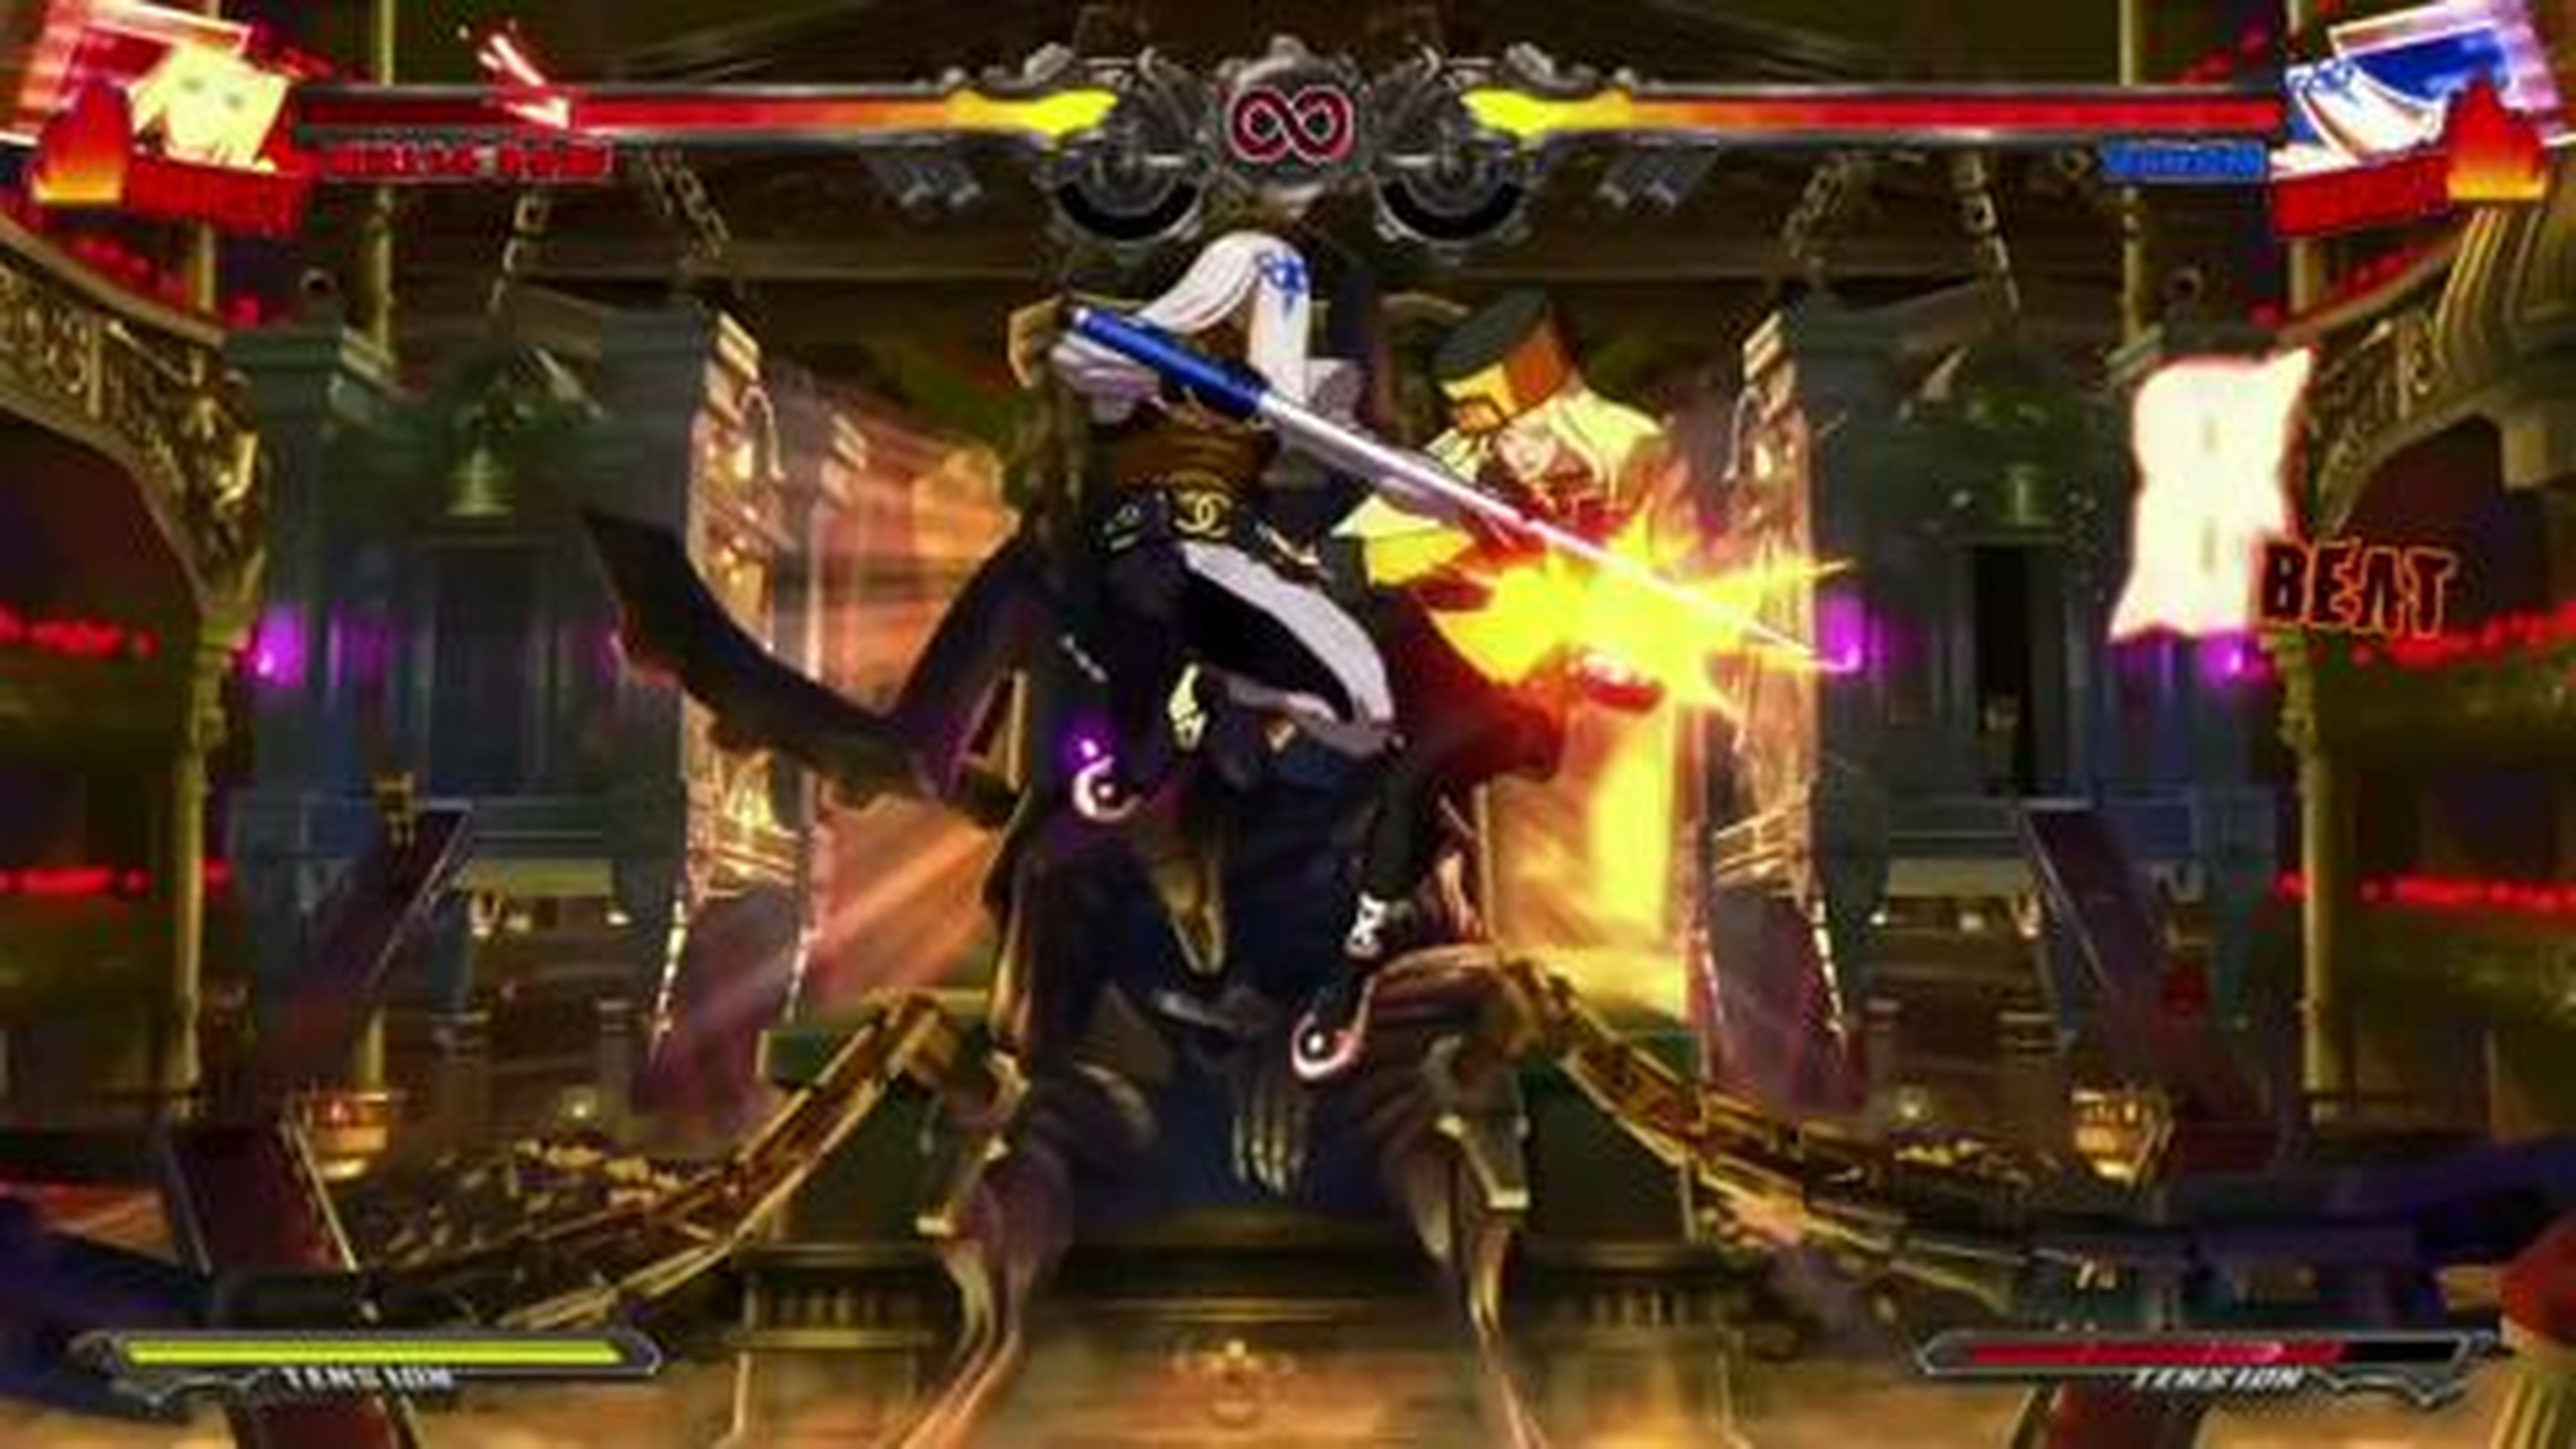 Guilty Gear XRD -SIGN- hits PS4 & PS3 - Launch Trailer